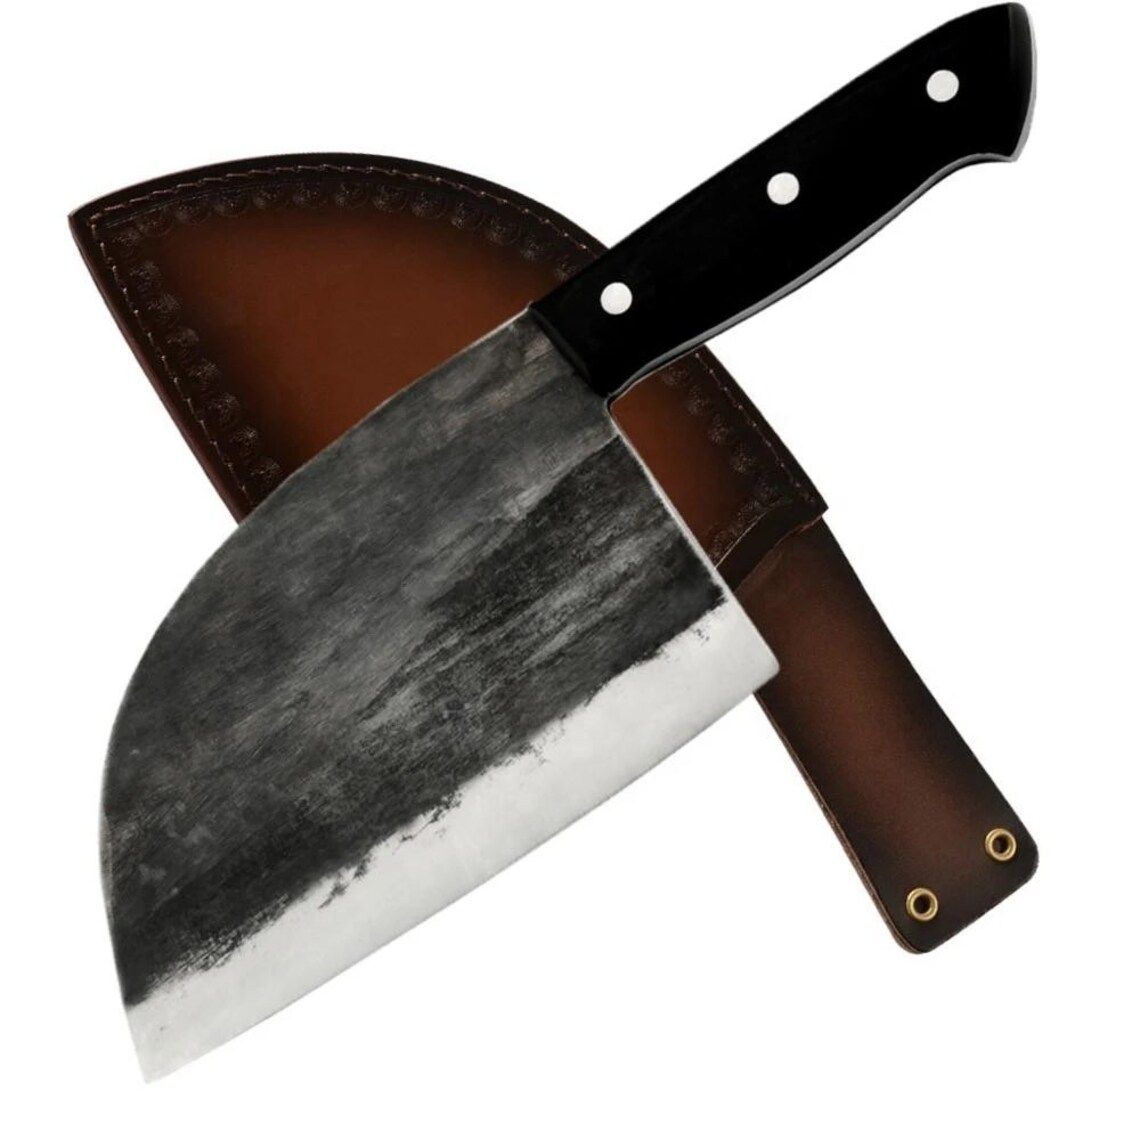 Pruchef - Hand Forged Butcher Knife With Leather Sheath - Black